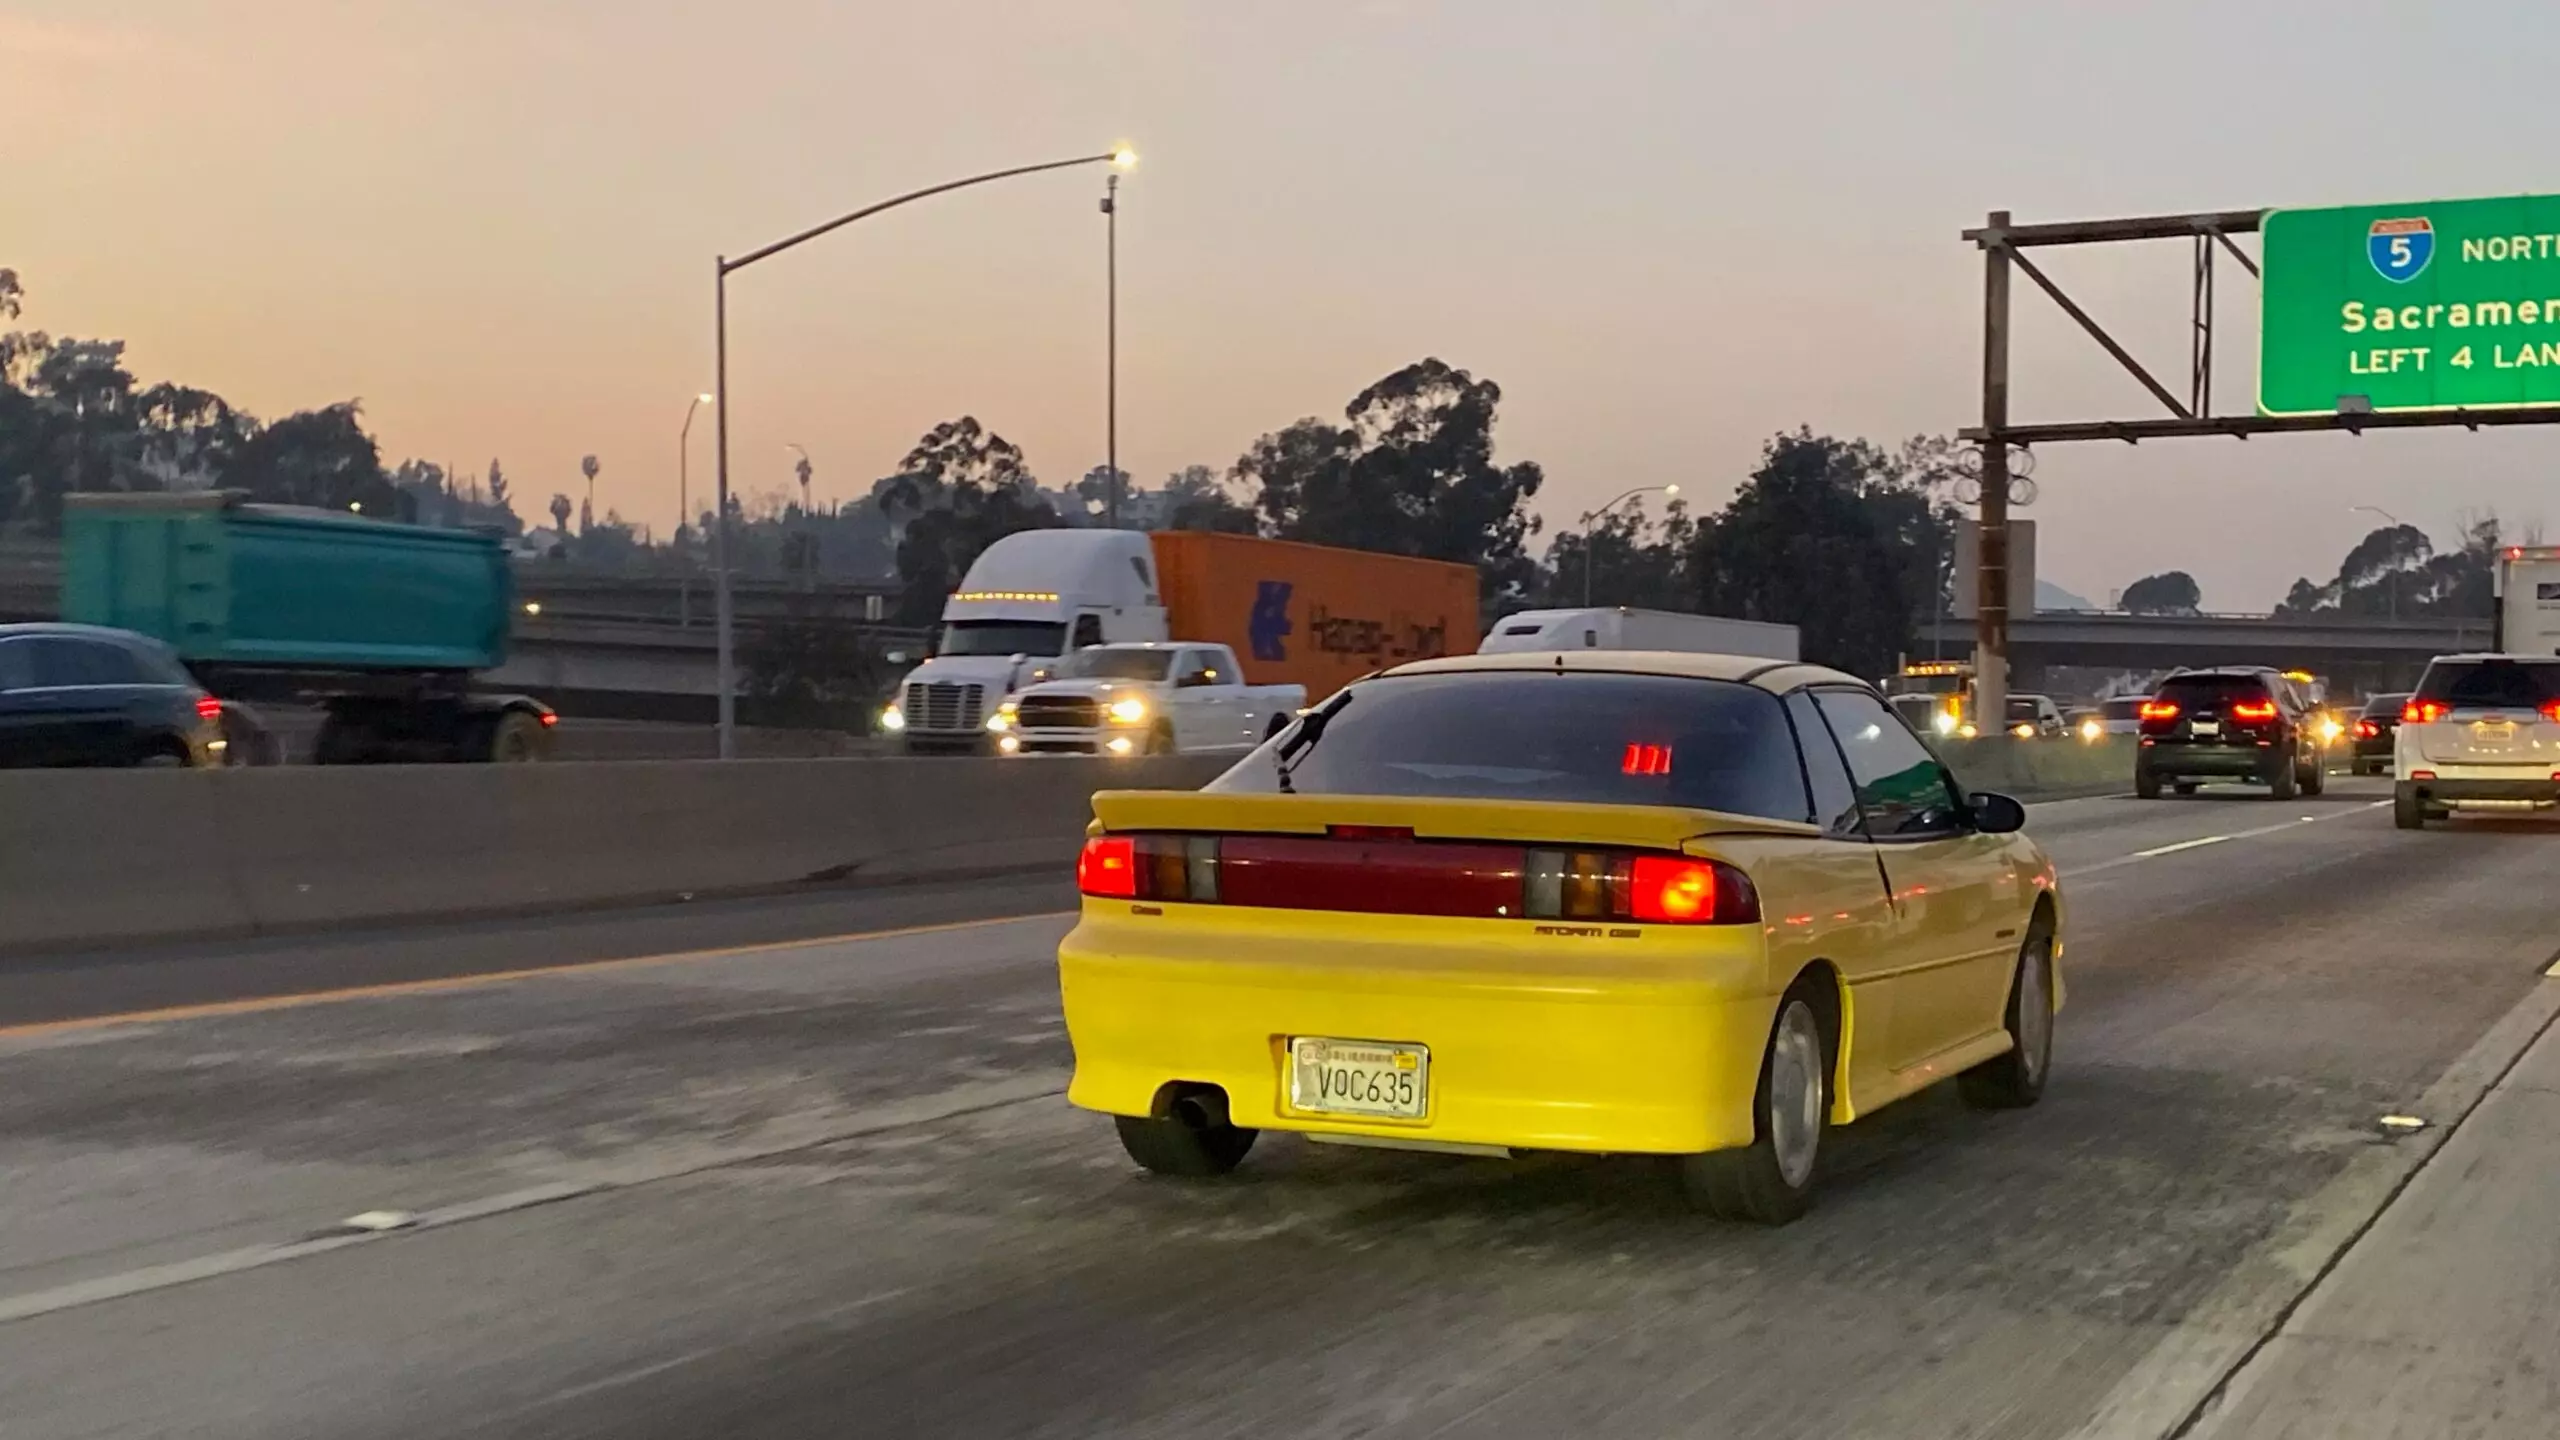 This Geo Storm Spotted in Traffic Is a True Unicorn | Autance